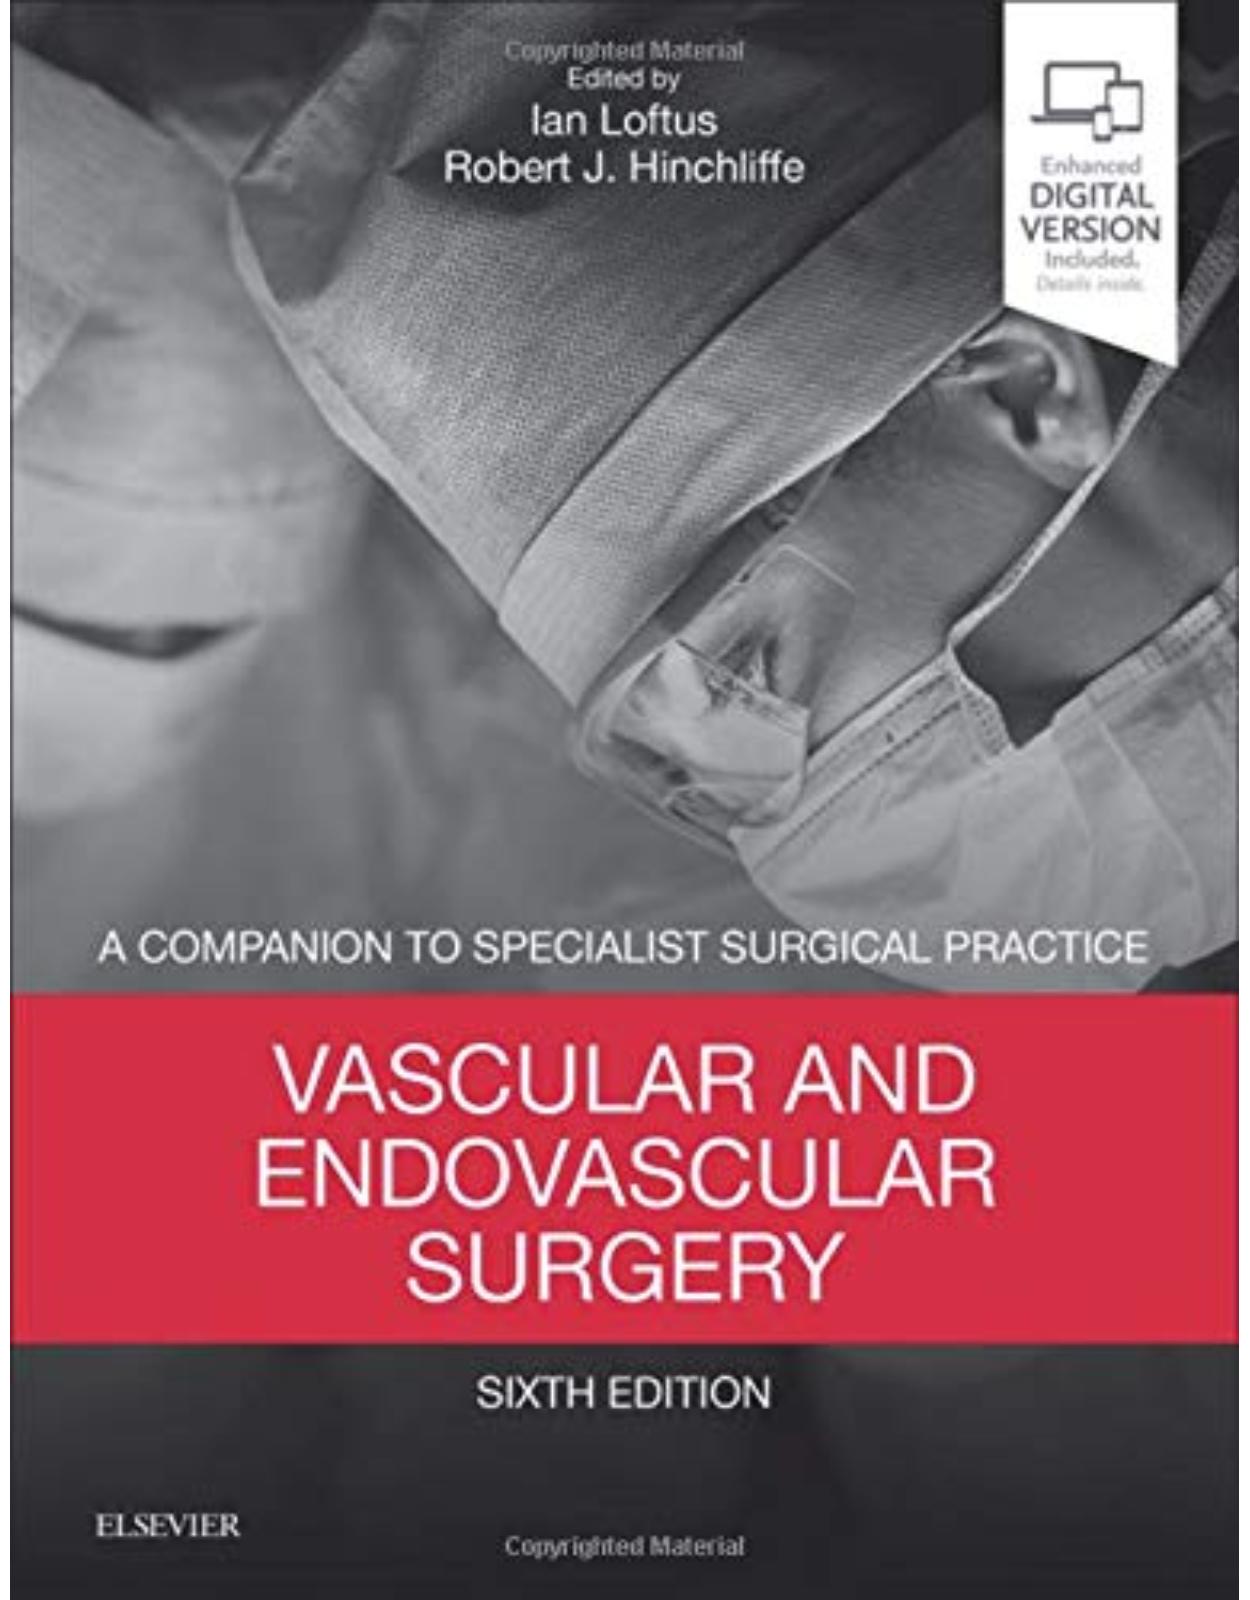 Vascular and Endovascular Surgery: A Companion to Specialist Surgical Practice, 6e